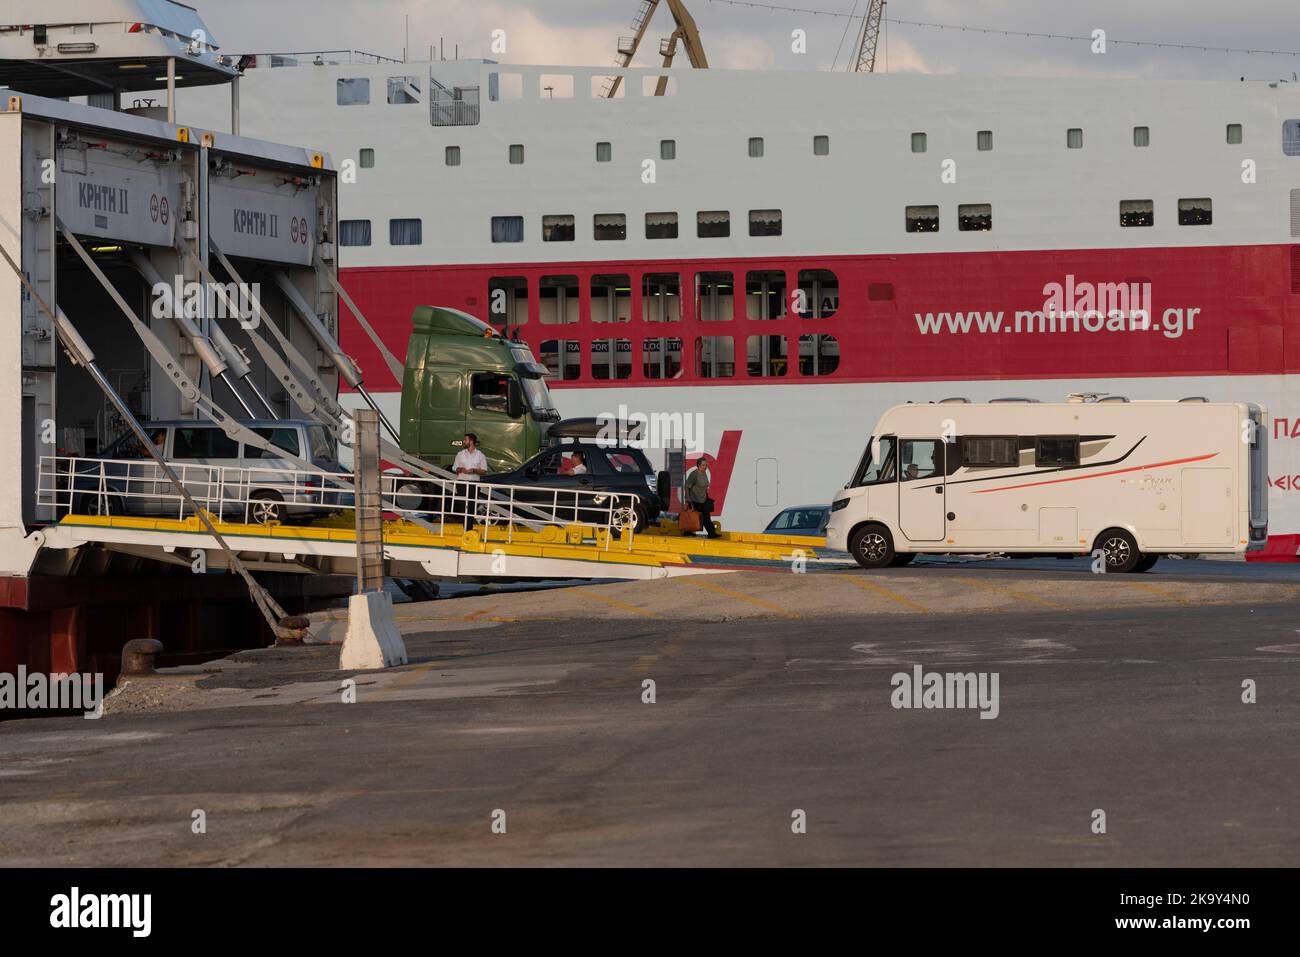 Heraklion, Crete, Greece. 2022. Large commercial truck and a motorhome loading onto a ferry in port of Heraklion. Stock Photo